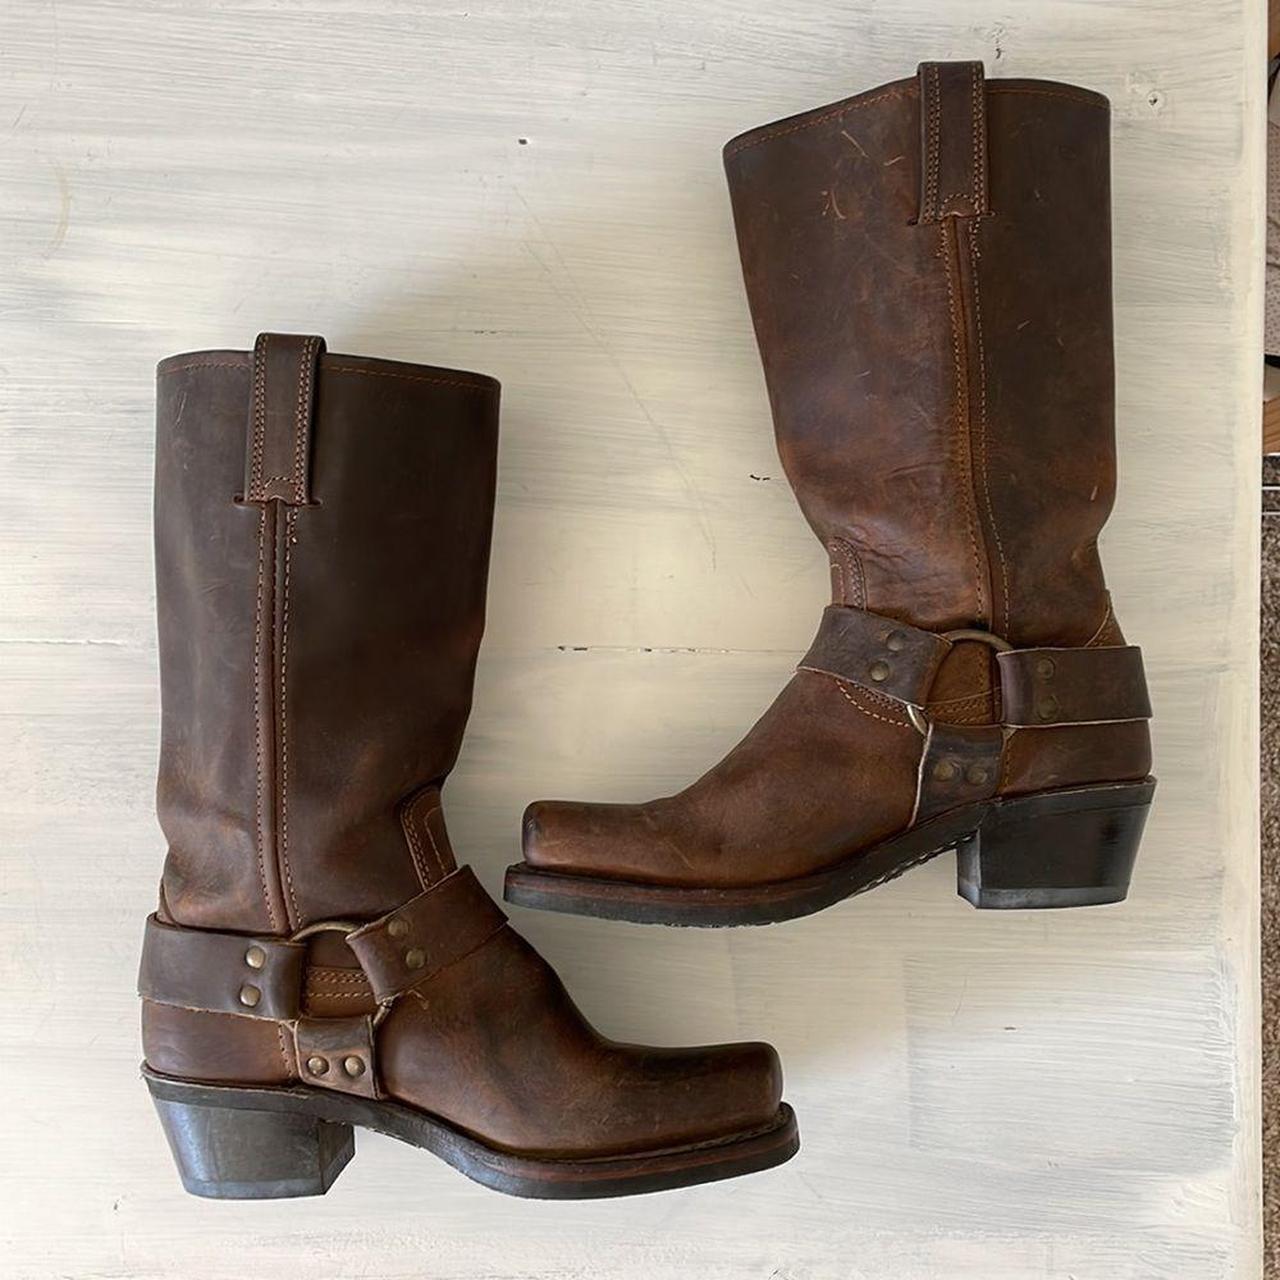 Frye brown 12r harness boots women’s size 6 Some... - Depop